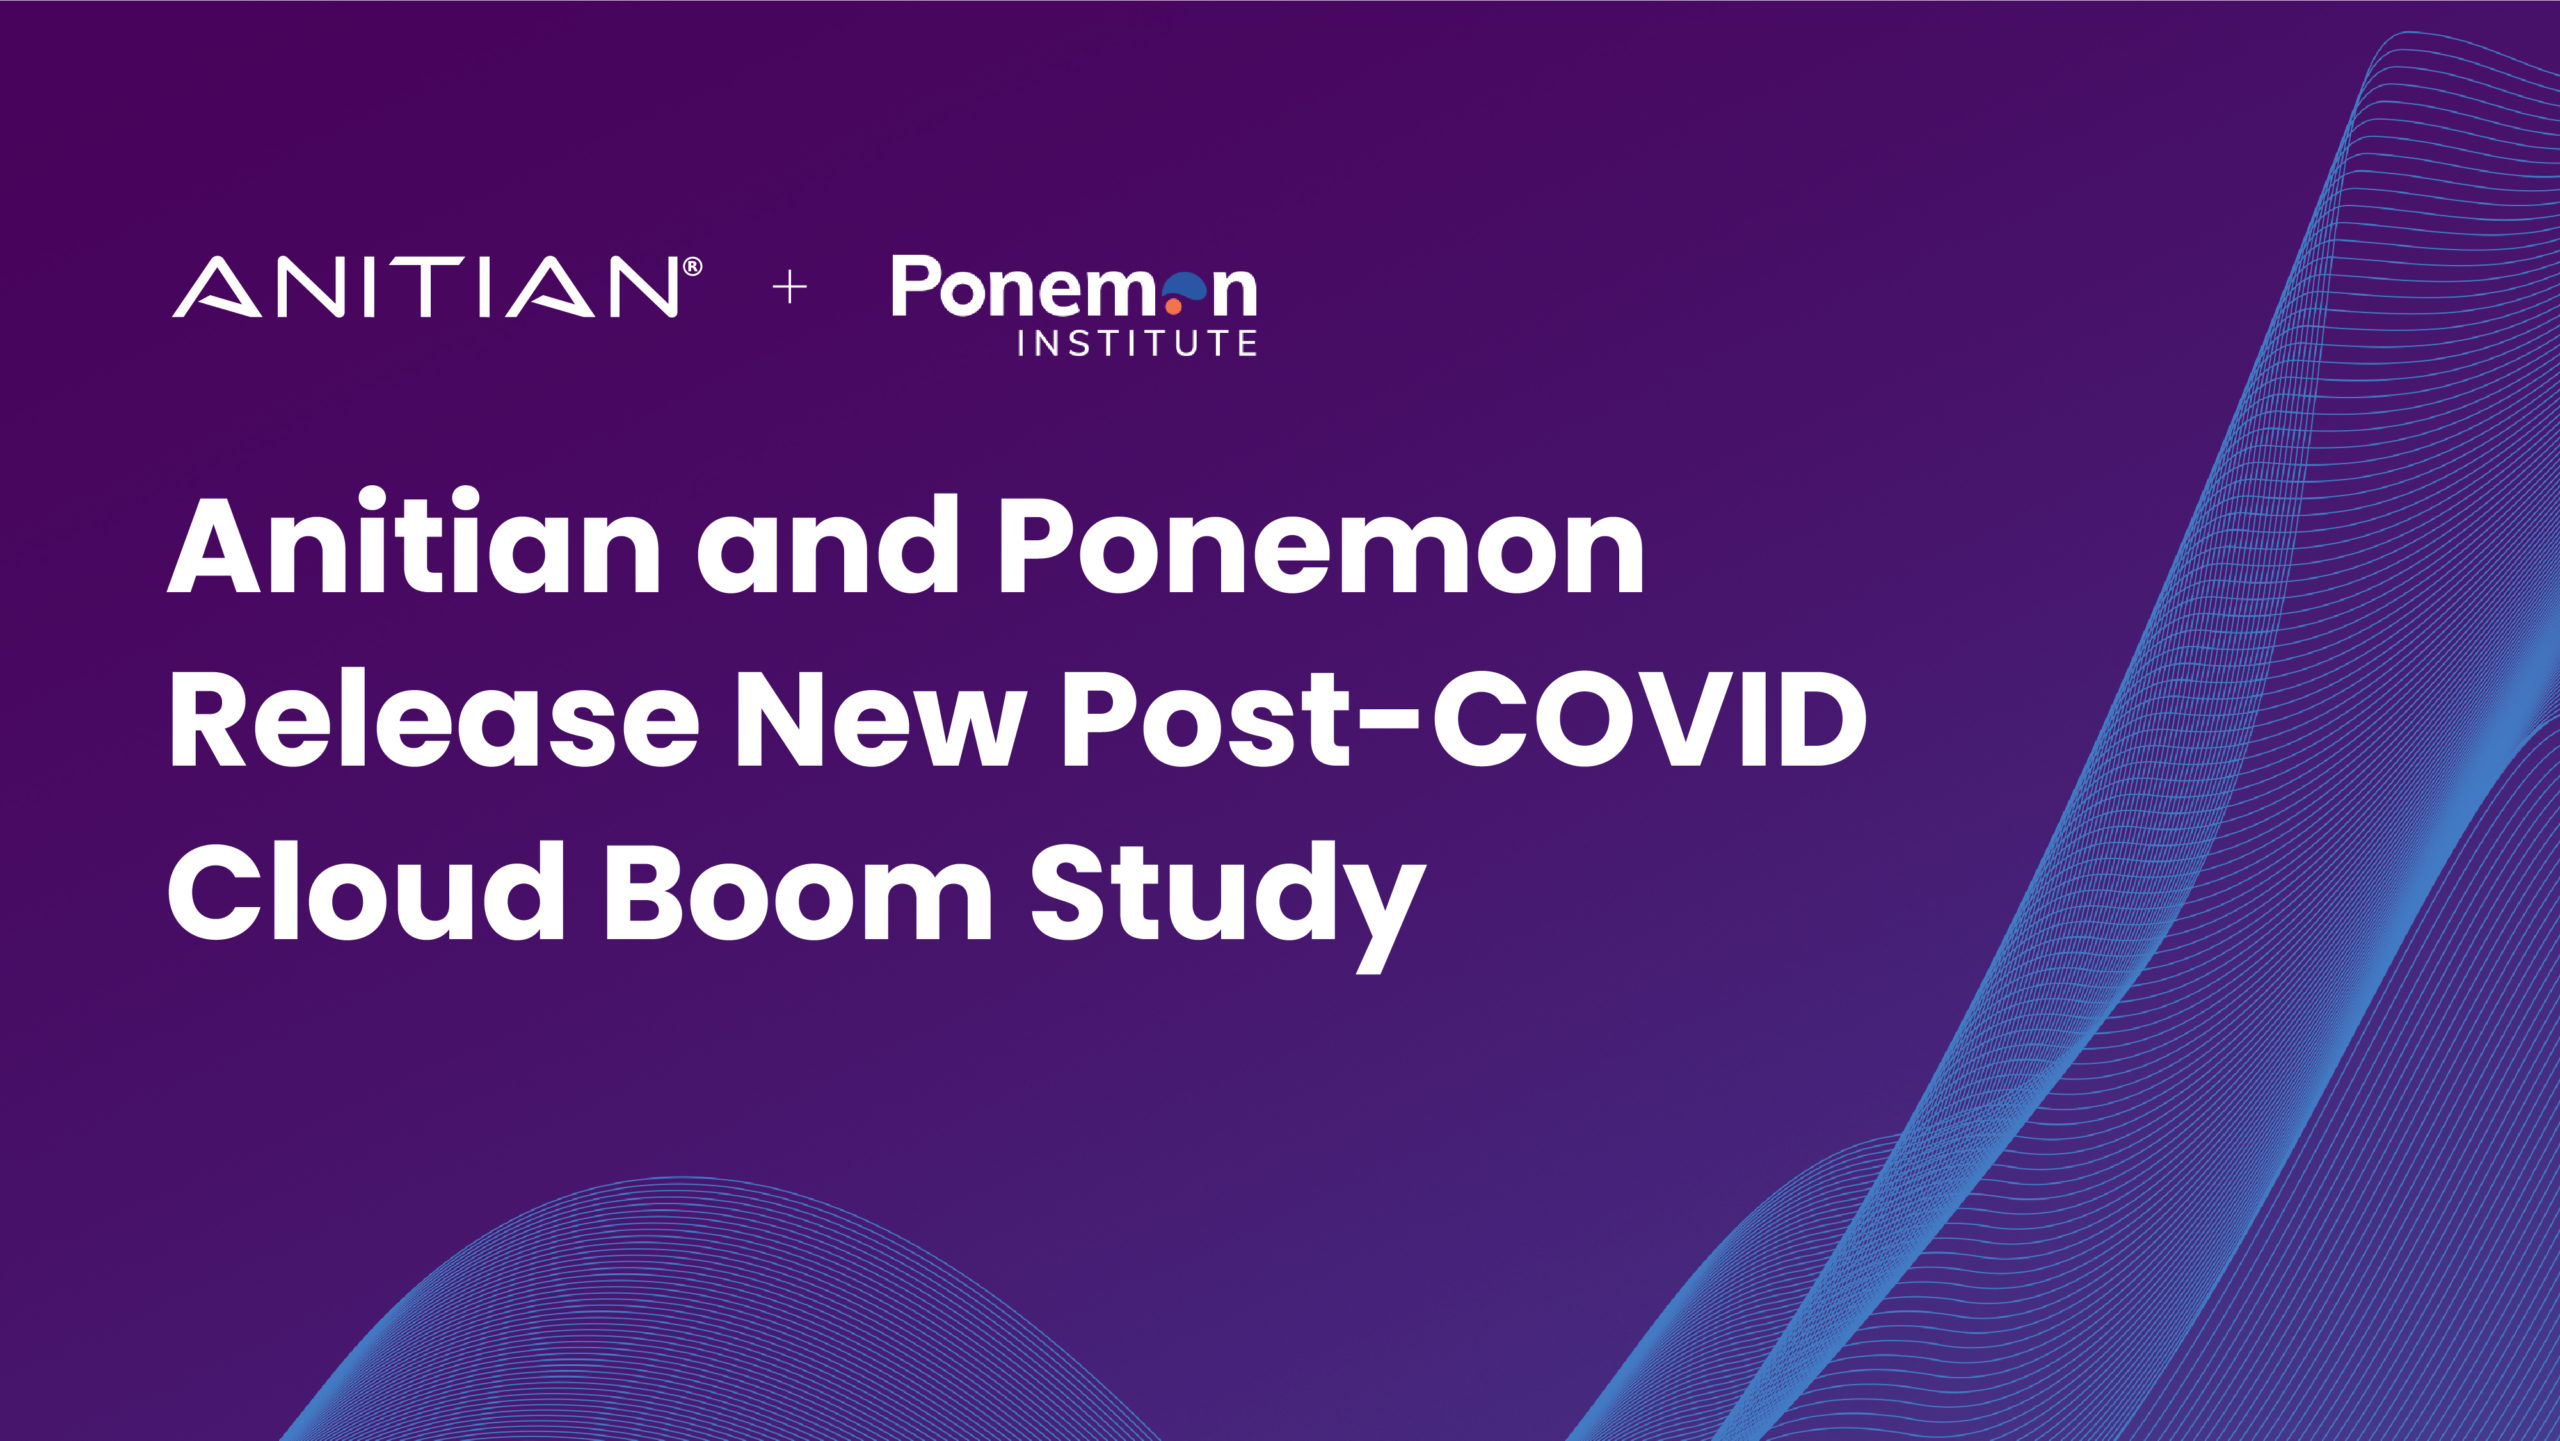 PR - Anitian and Ponemon Release New Post-COVID Cloud Boom Study That Reveals How Enterprise Digital Transformation Significantly Increased Business Growth, Security Posture, and Financial Strength